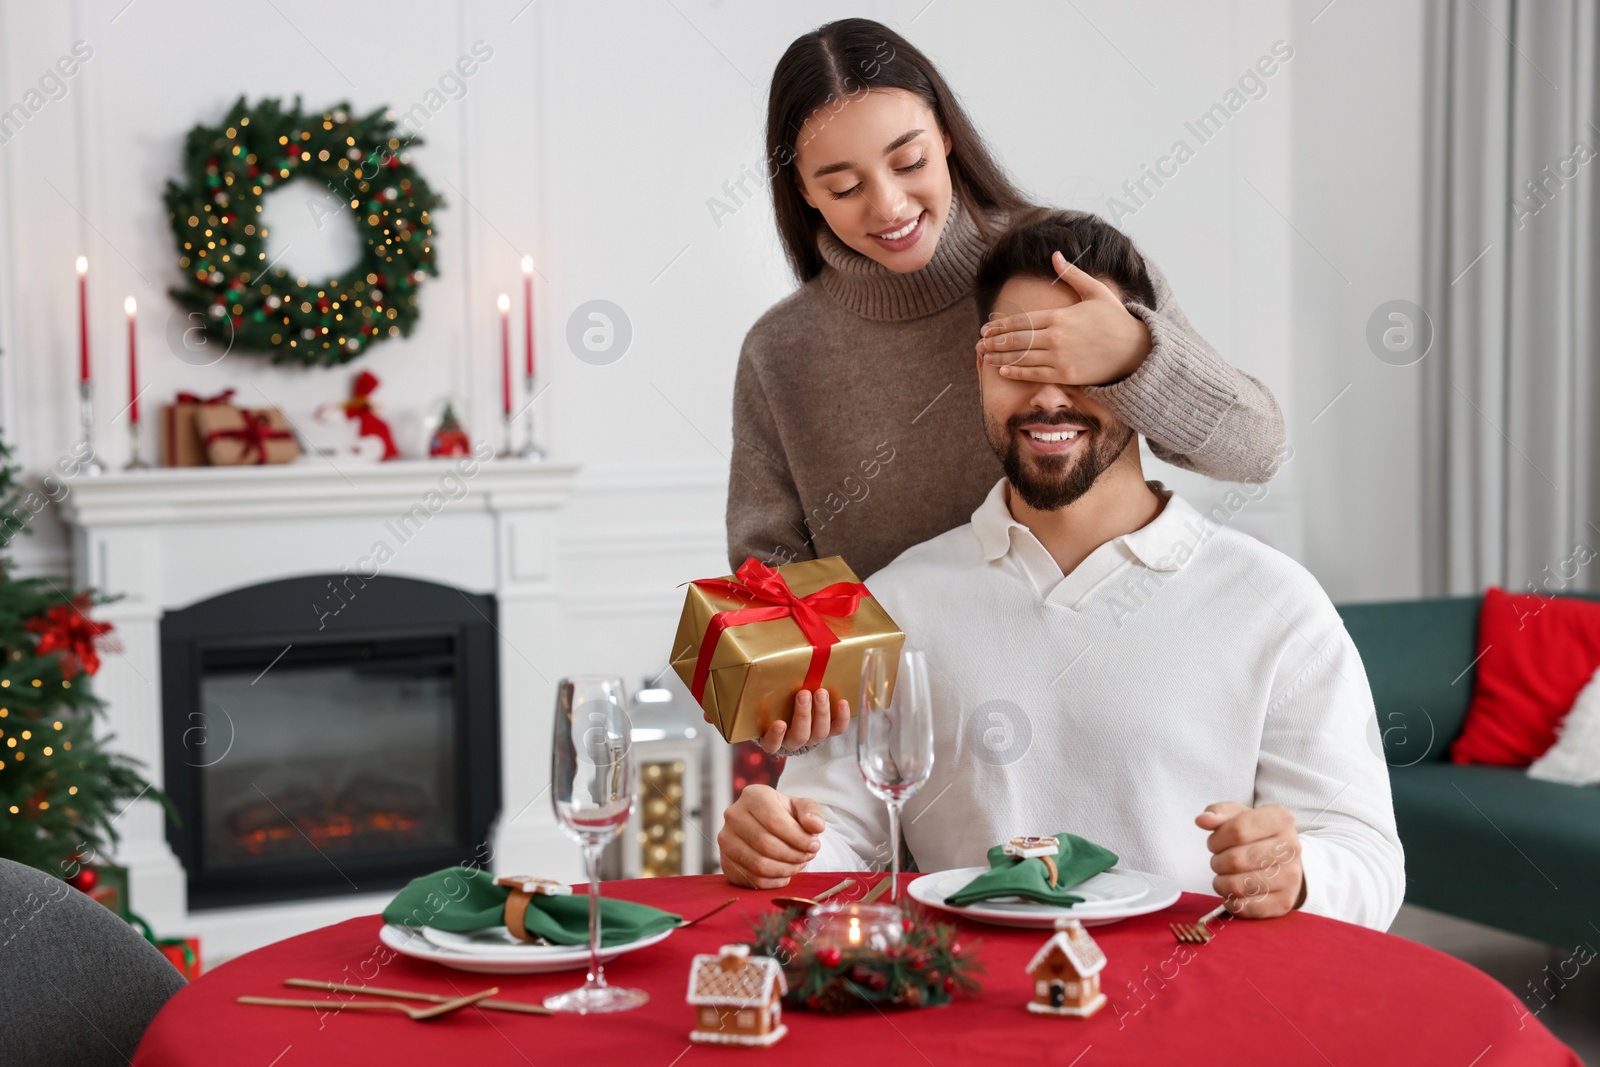 Photo of Happy woman surprising her boyfriend with Christmas gift at home